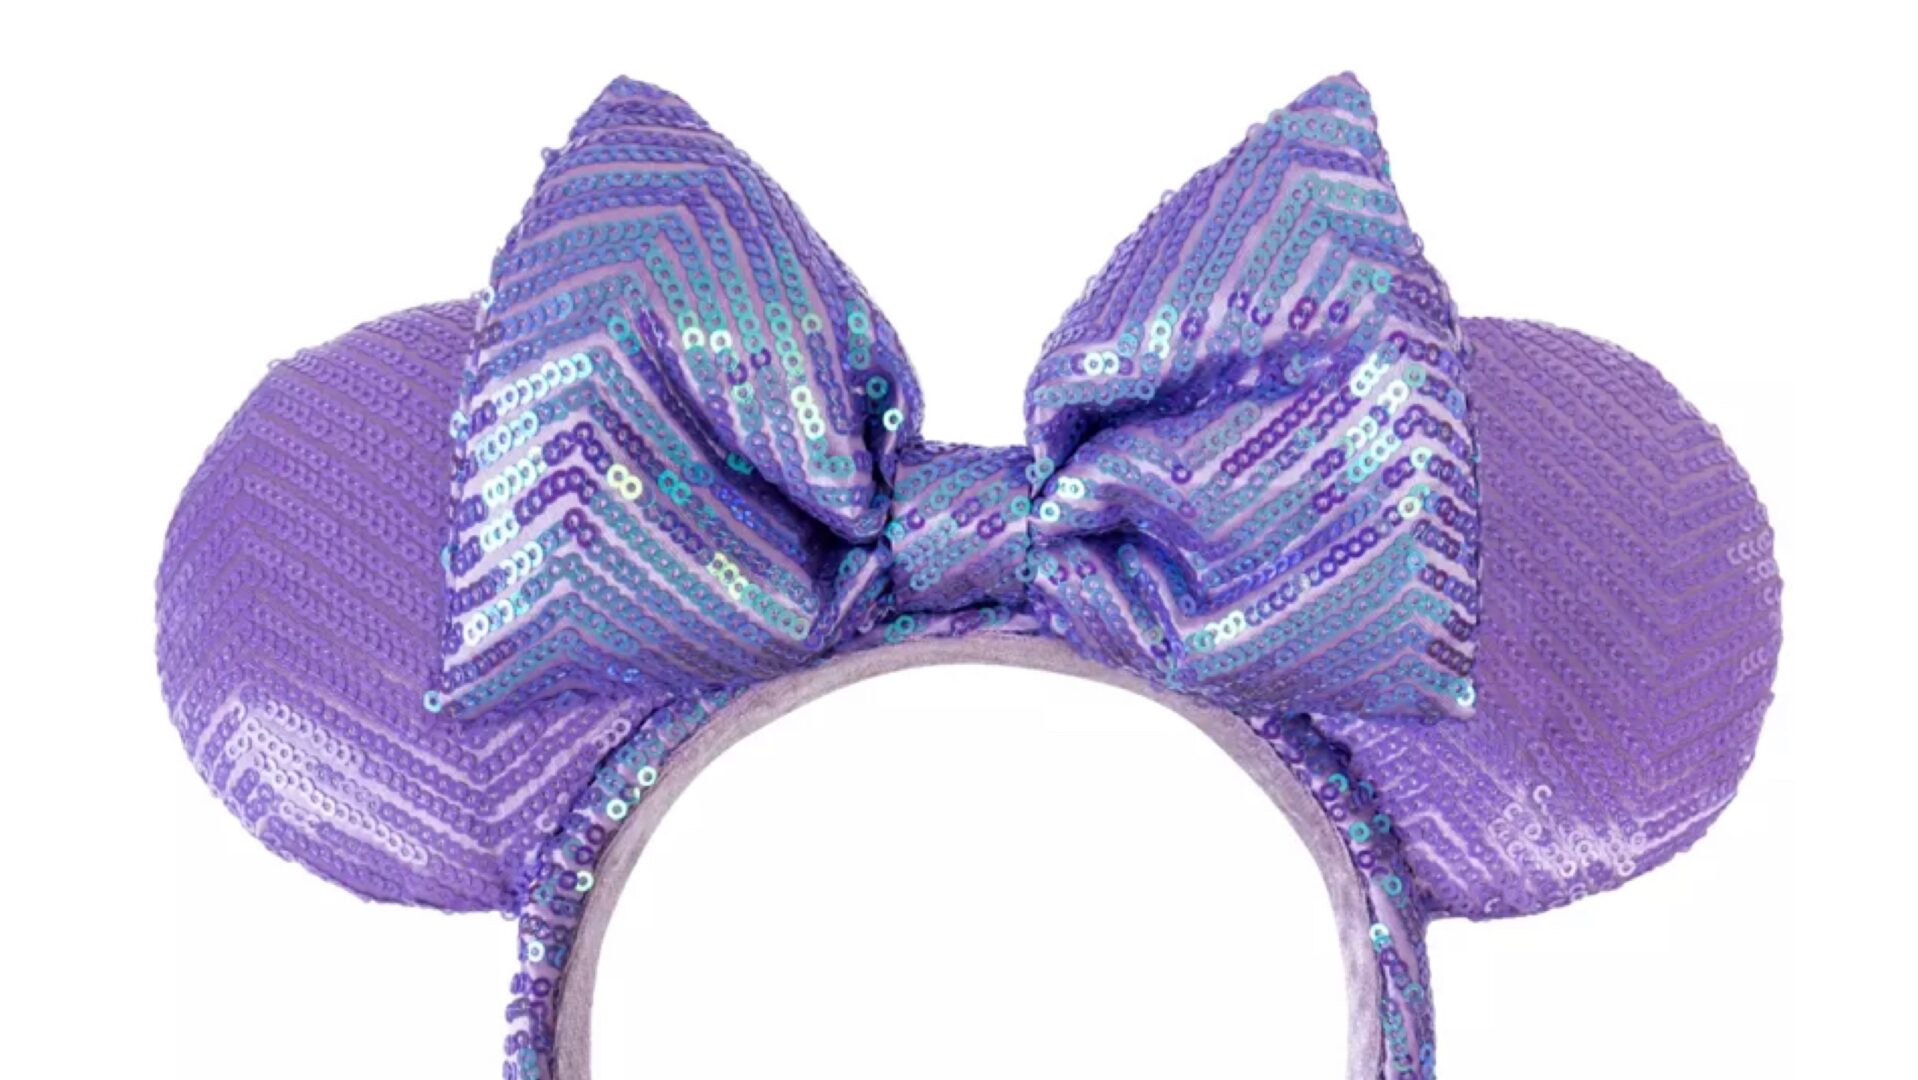 New Lavender Minnie Ears Available Now At shopDisney!